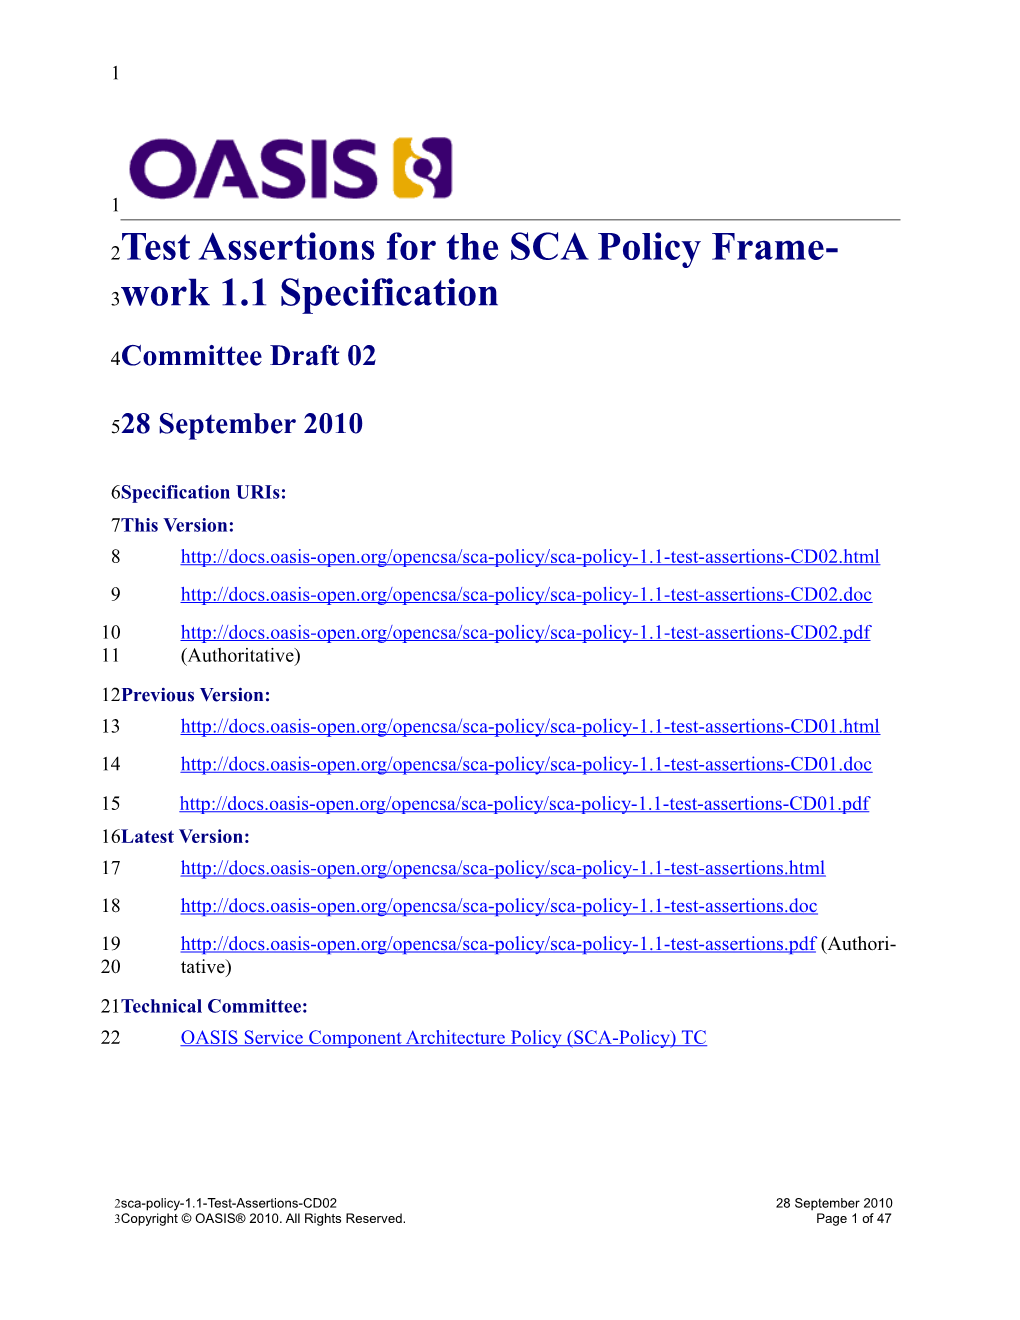 Test Assertions for the SCA Policy FW Specification 1.1